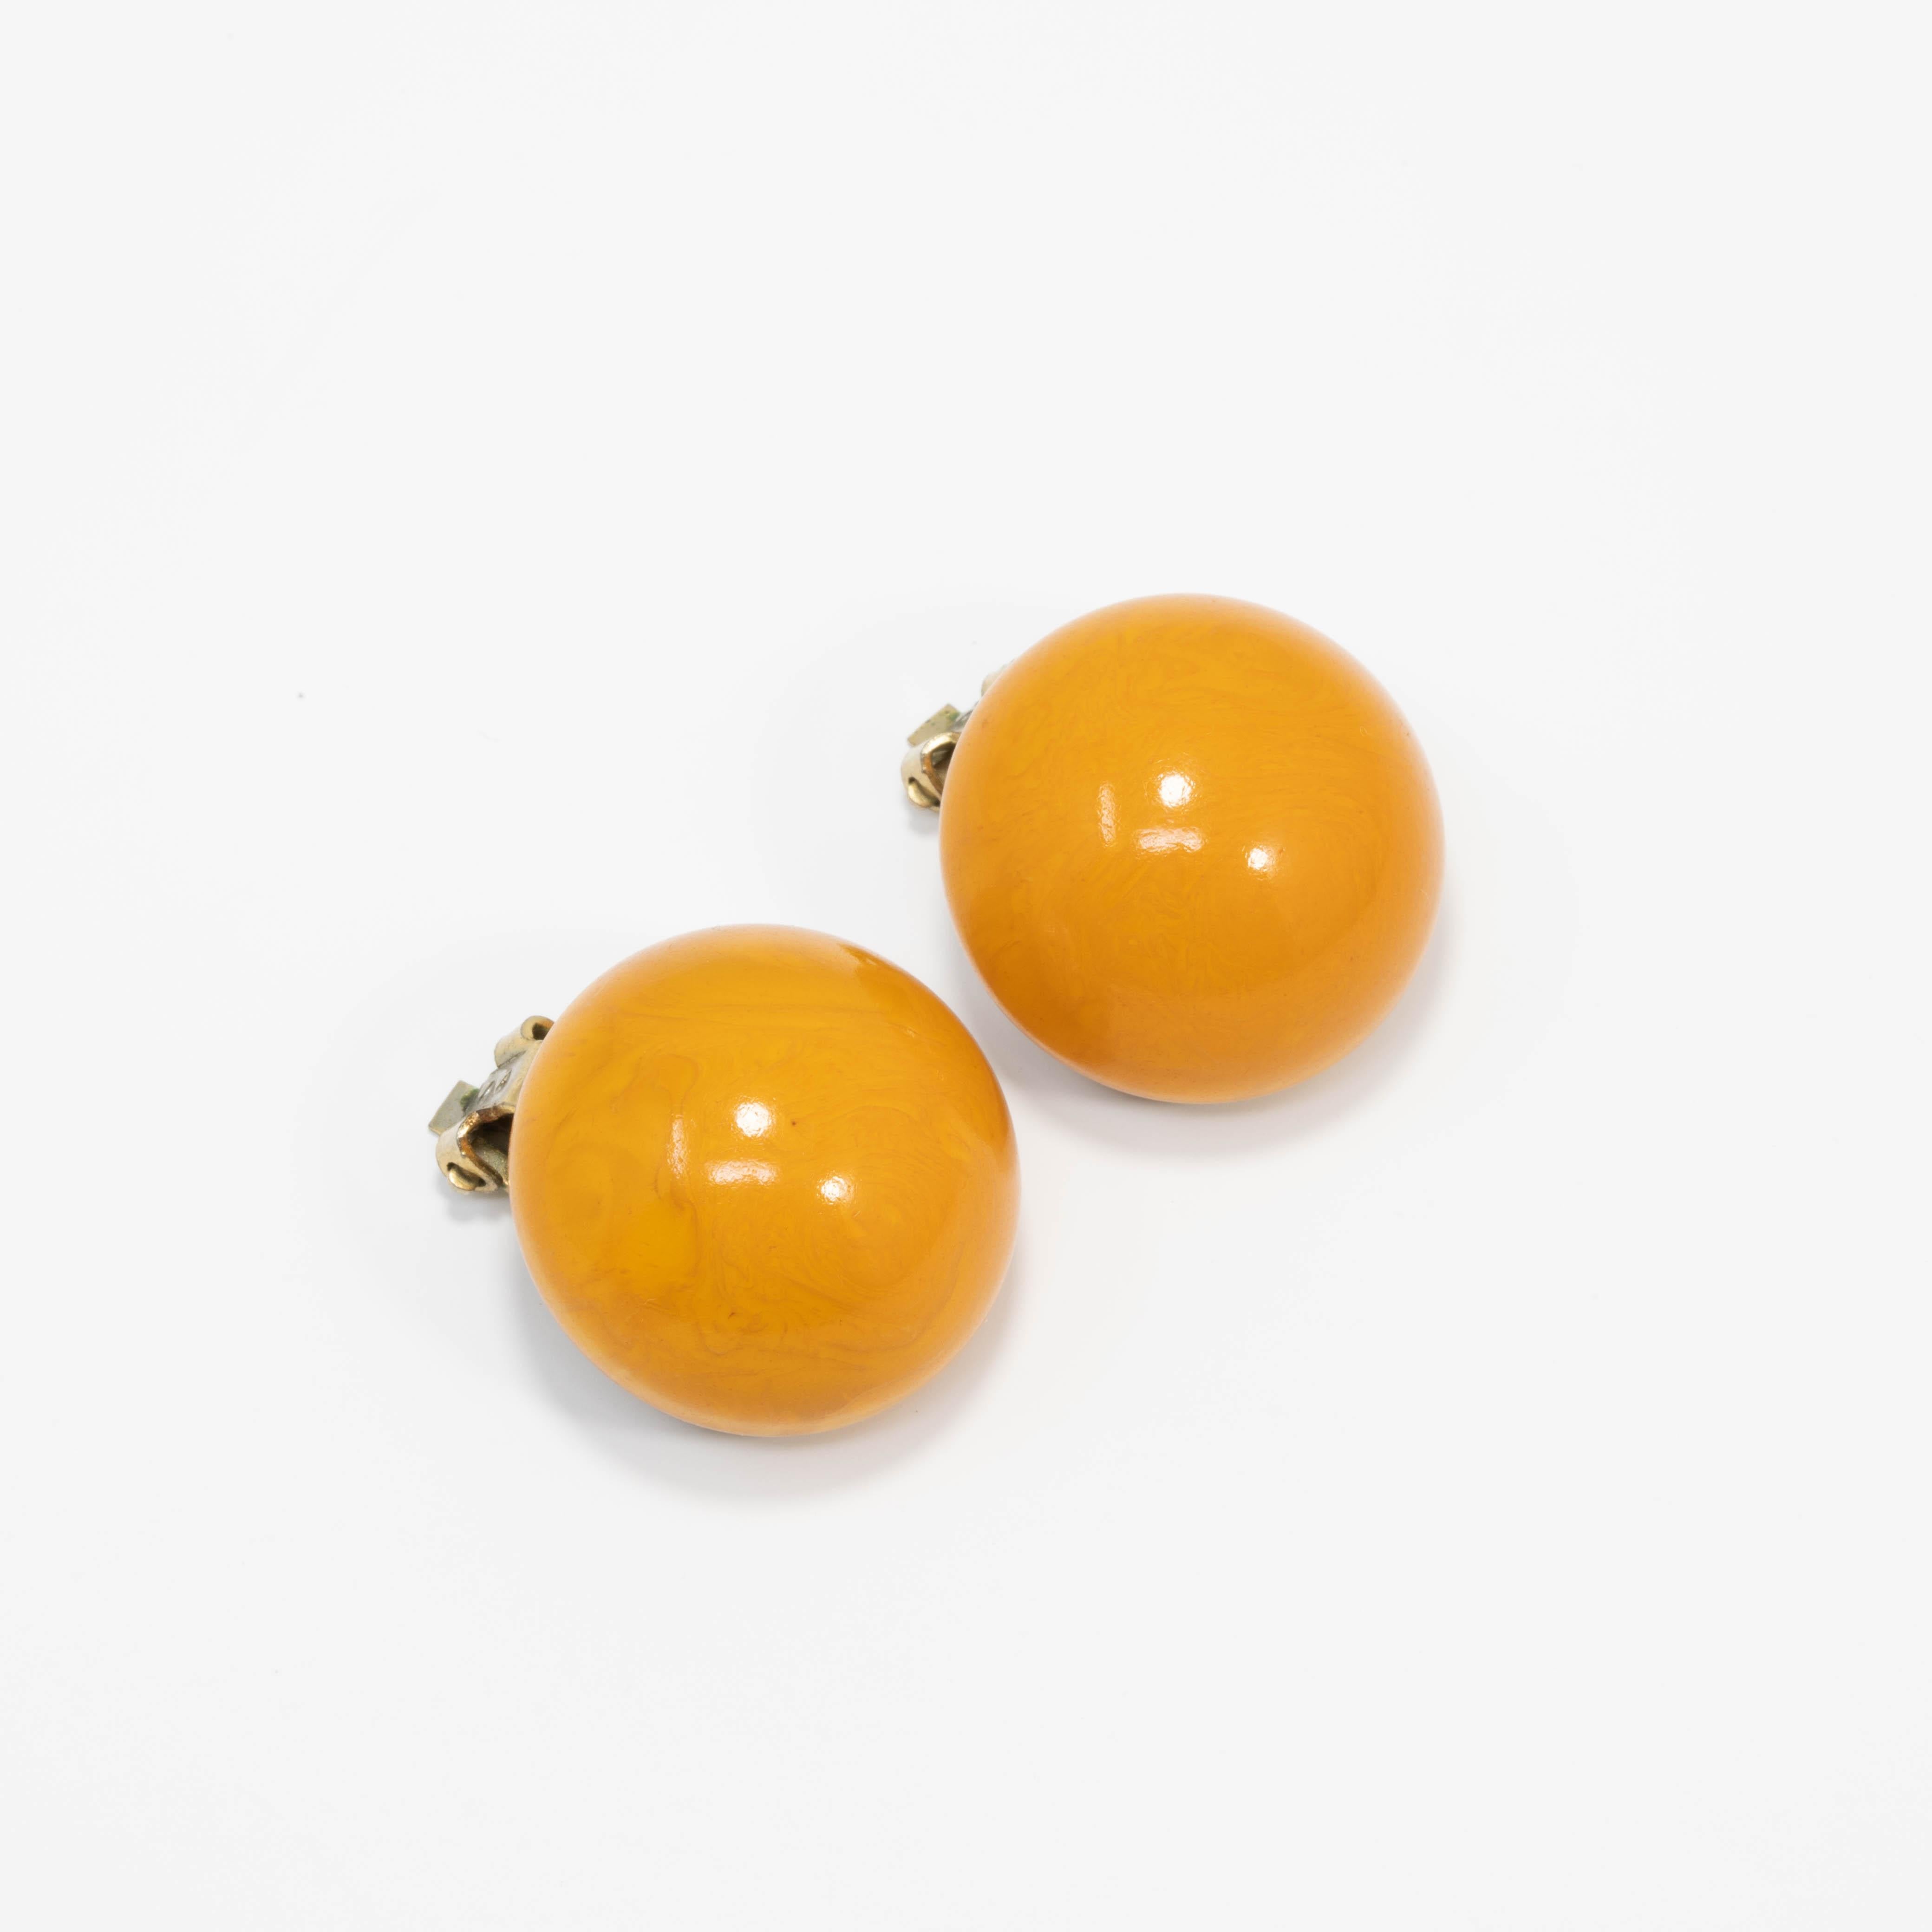 A pair of stylish vintage bakelite earrings. Each features an amber butterscotch yellow bakelite button set on brass-tone clip on hardware.

Circa early to mid 1900s.